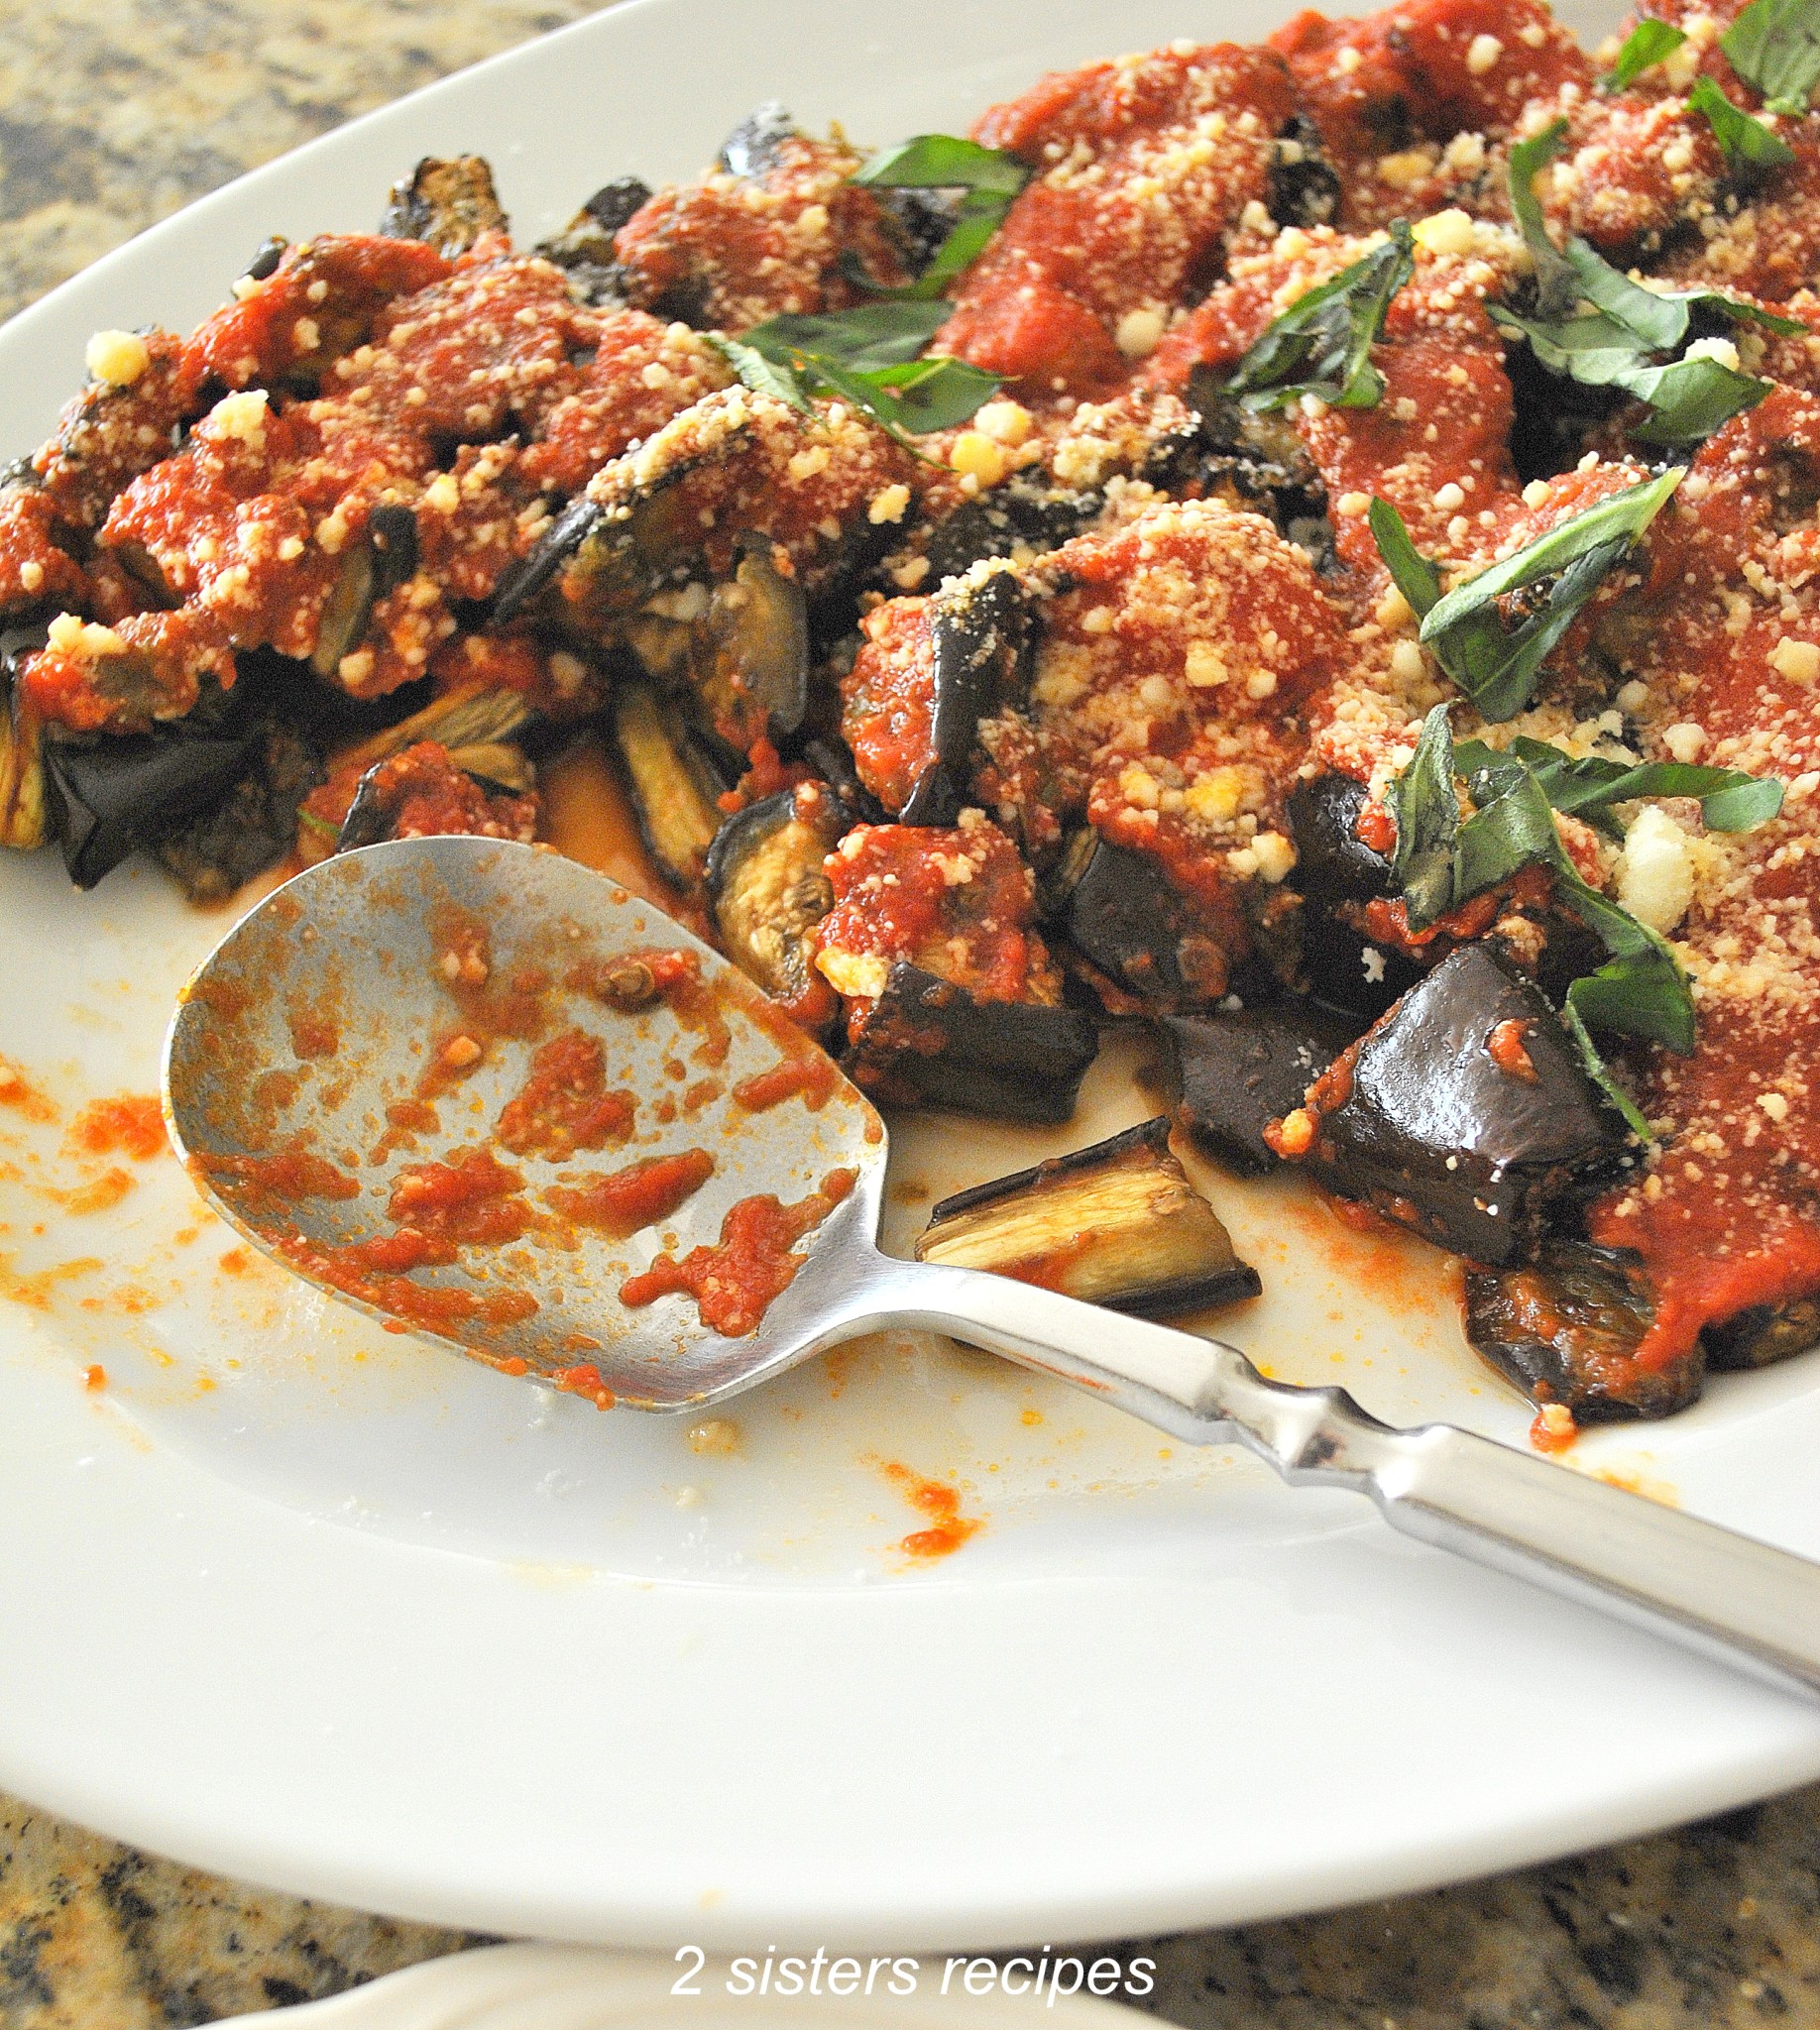 Roasted Eggplant Parm - Lightened! by 2sistersrecipes.com